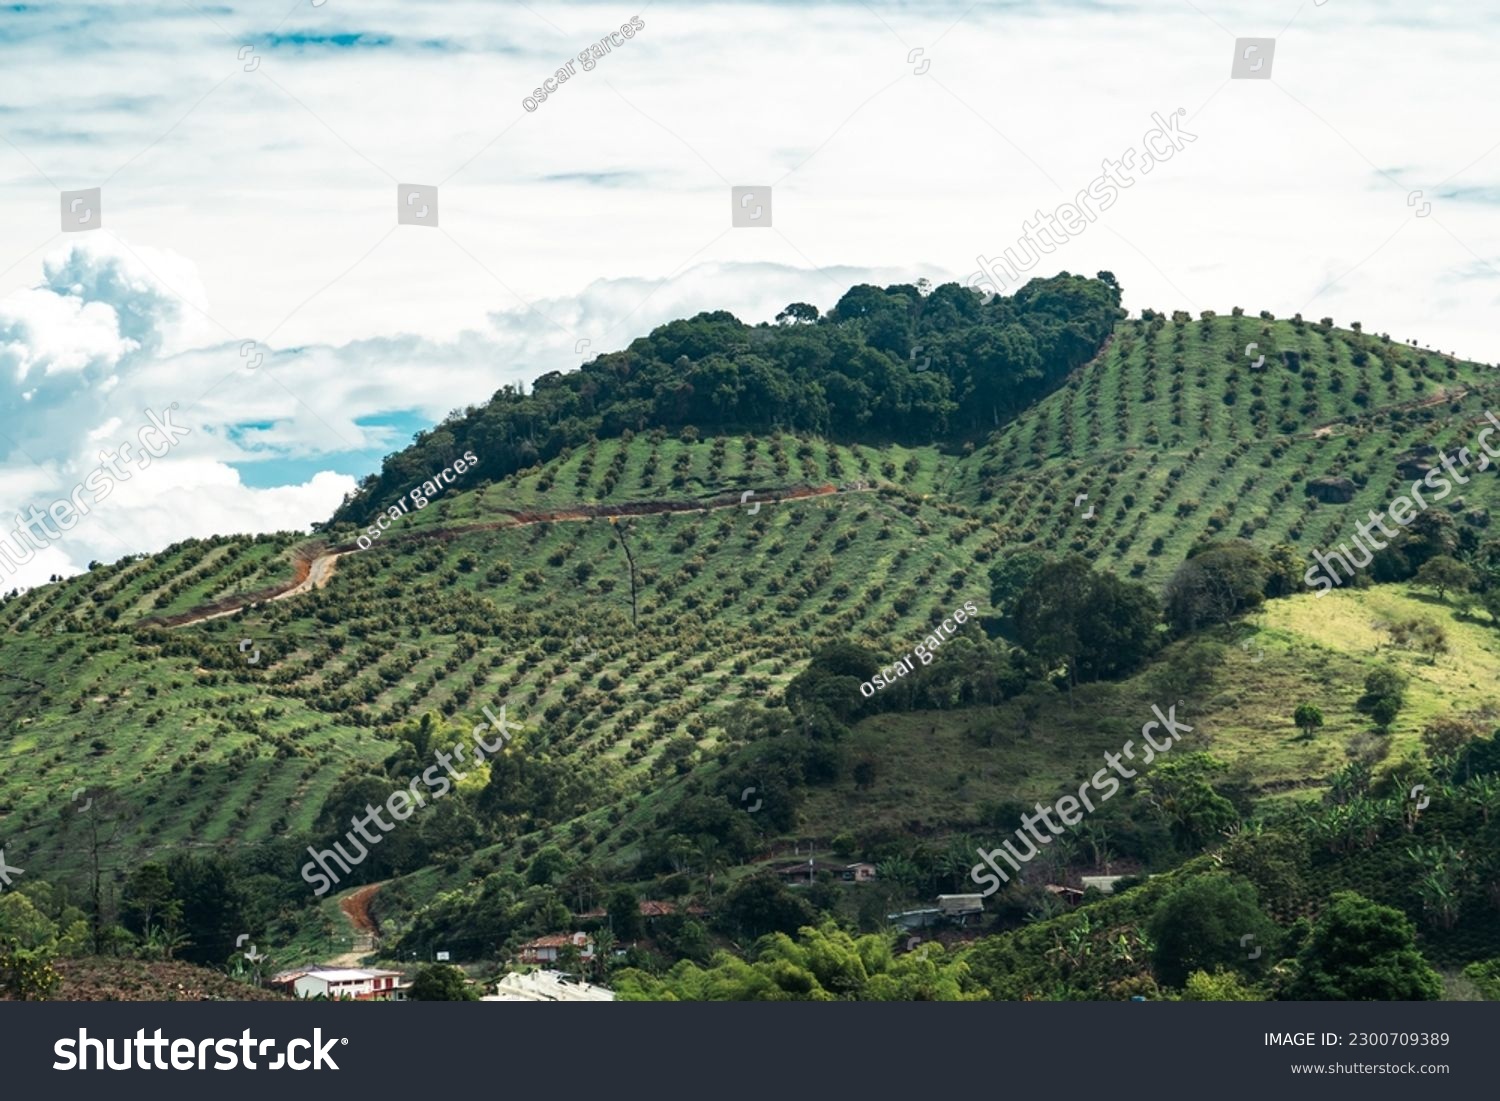 Mountain with avocado plantation and rural landscape. Jerico, Antioquia, Colombia.  #2300709389